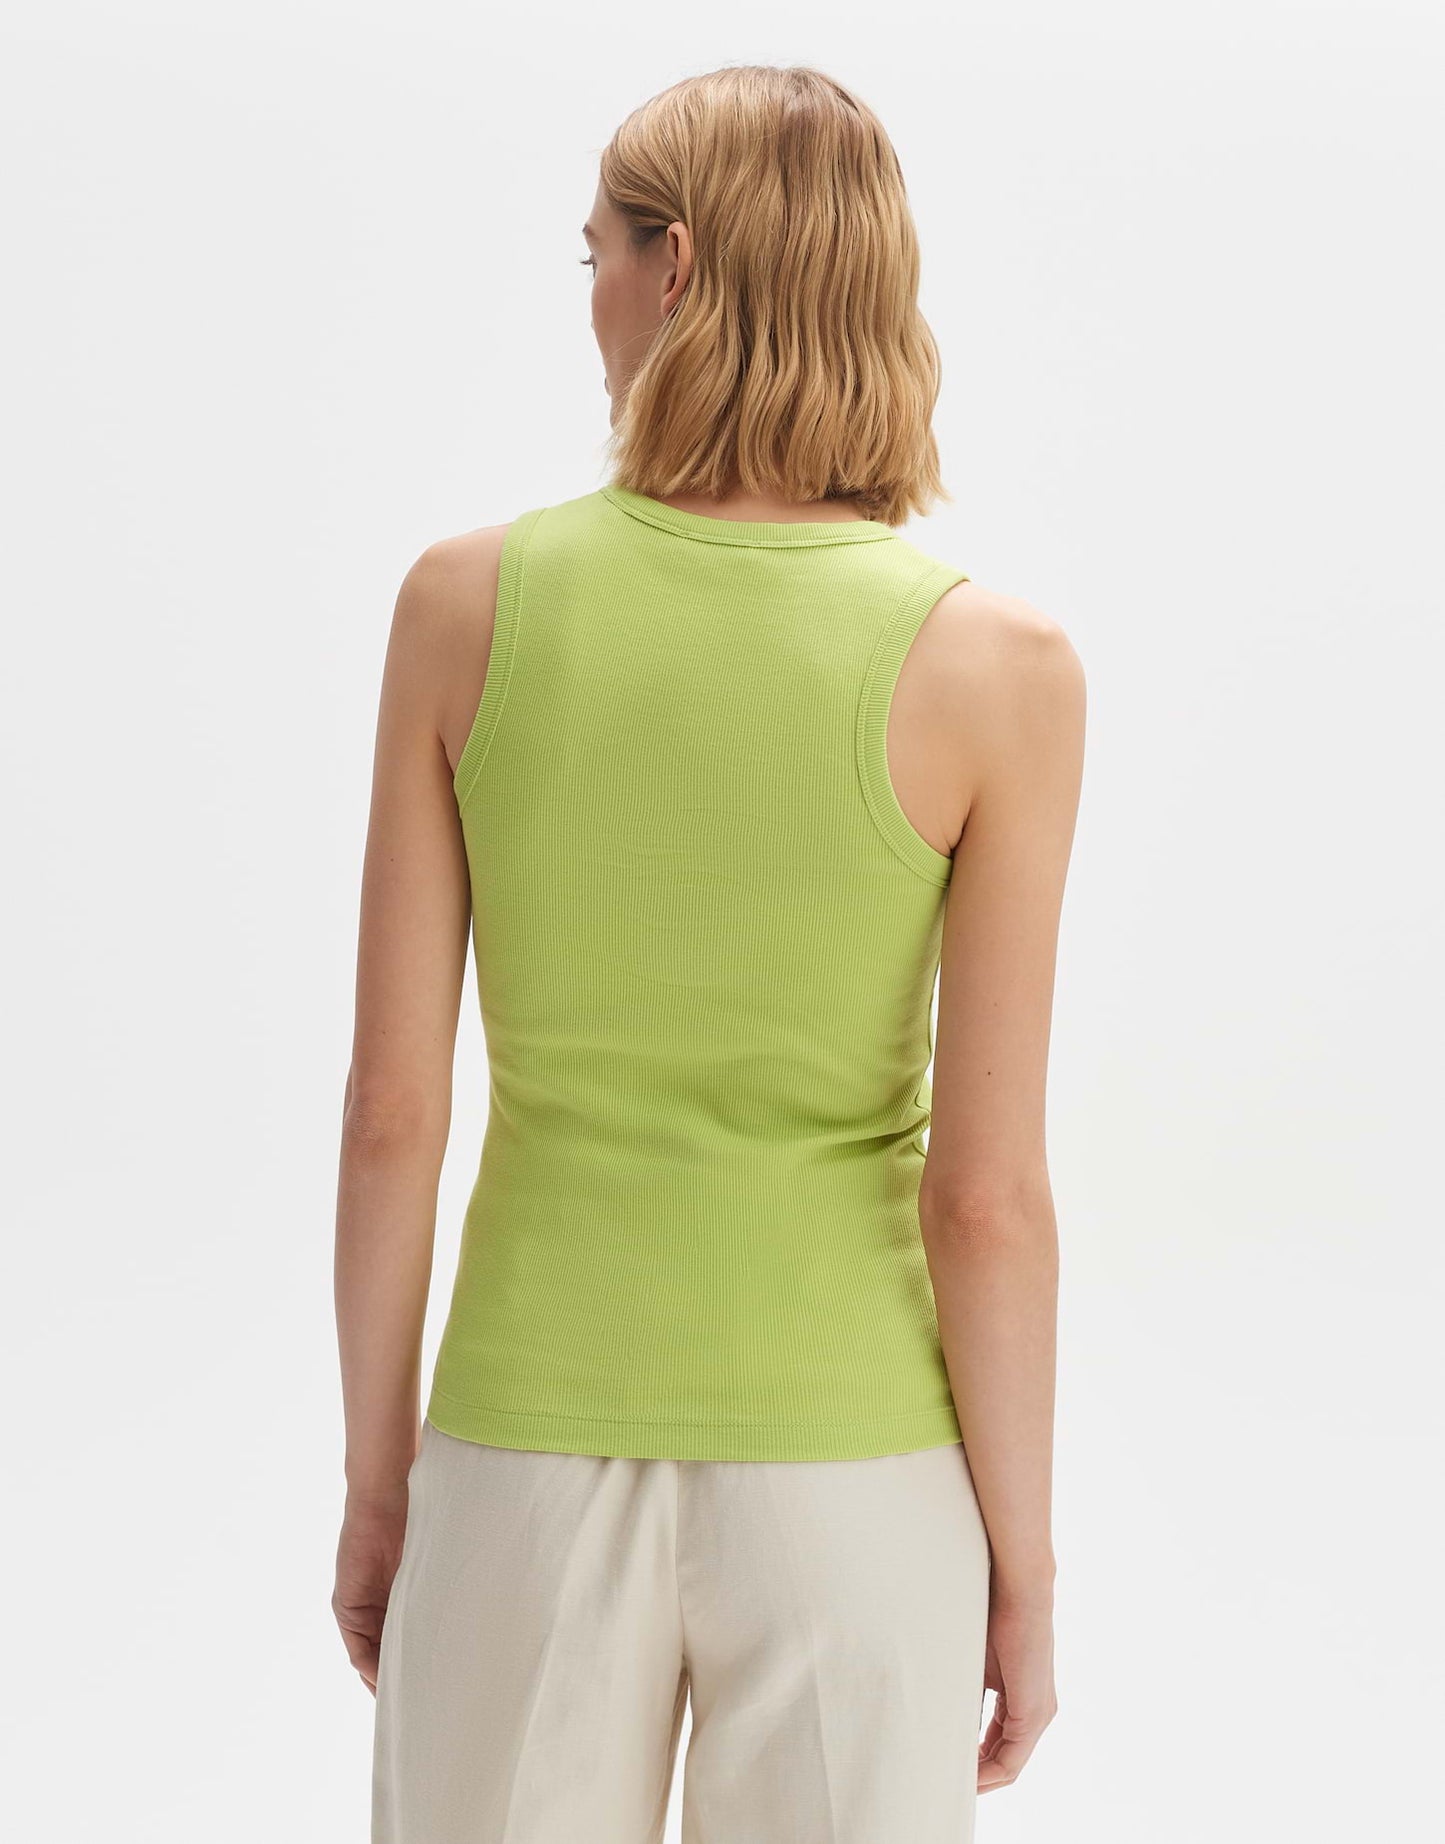 Ilesso (Lime Green)